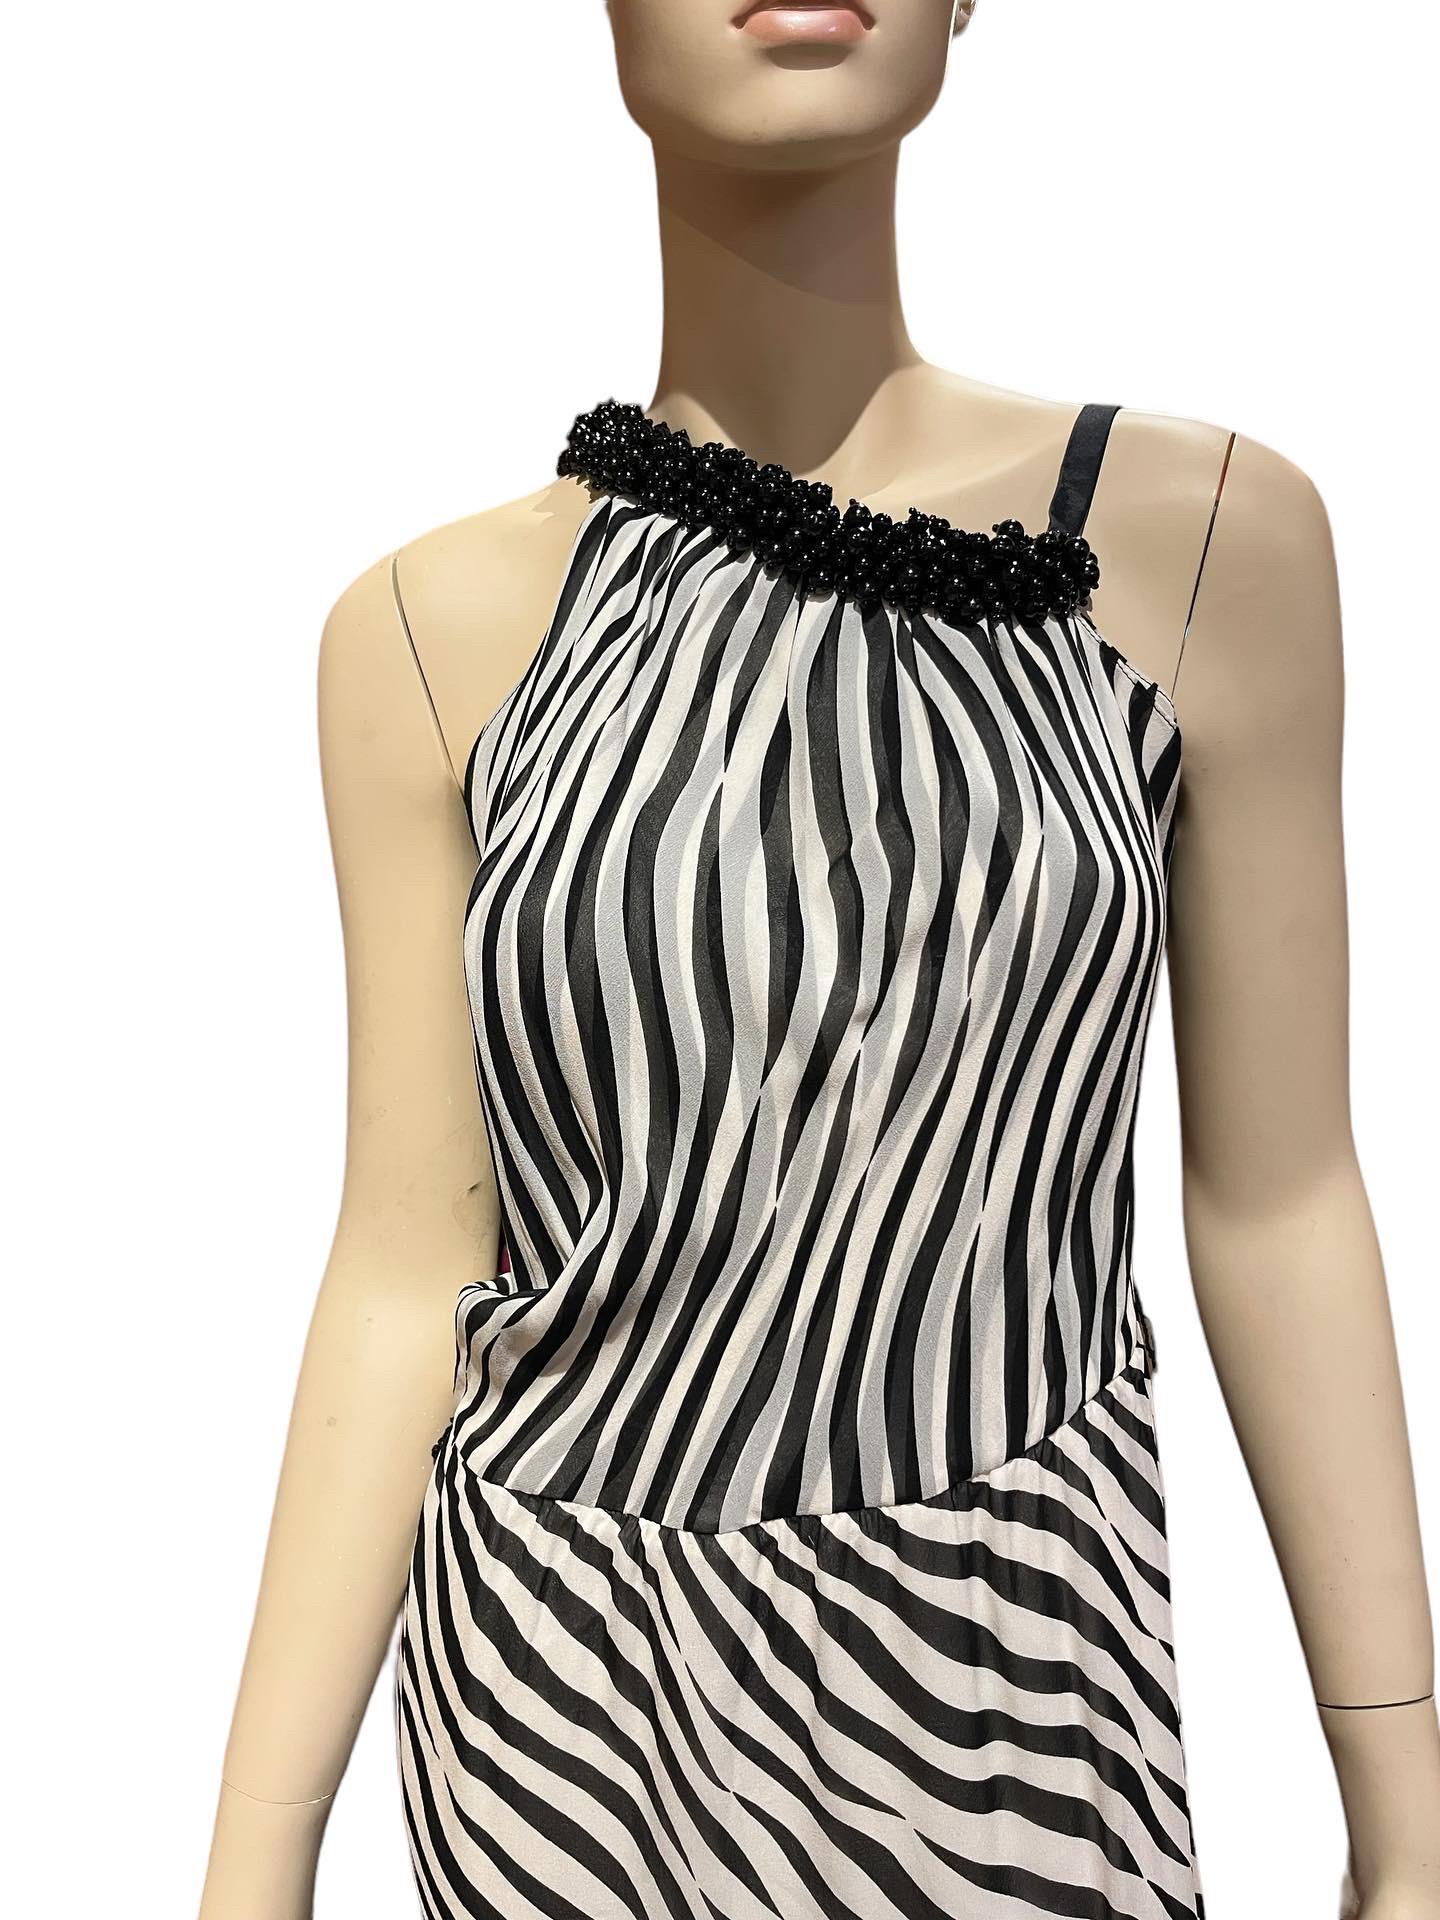 Y2k Stephen Burrows Zebra Stripe Silk Chiffon Gown with Beaded Asymmetrical Neckline

Labeled size 8 
34”bust 
64”length

Stephen Burrows is an American fashion designer based in New York City, known for being one of the first African-American